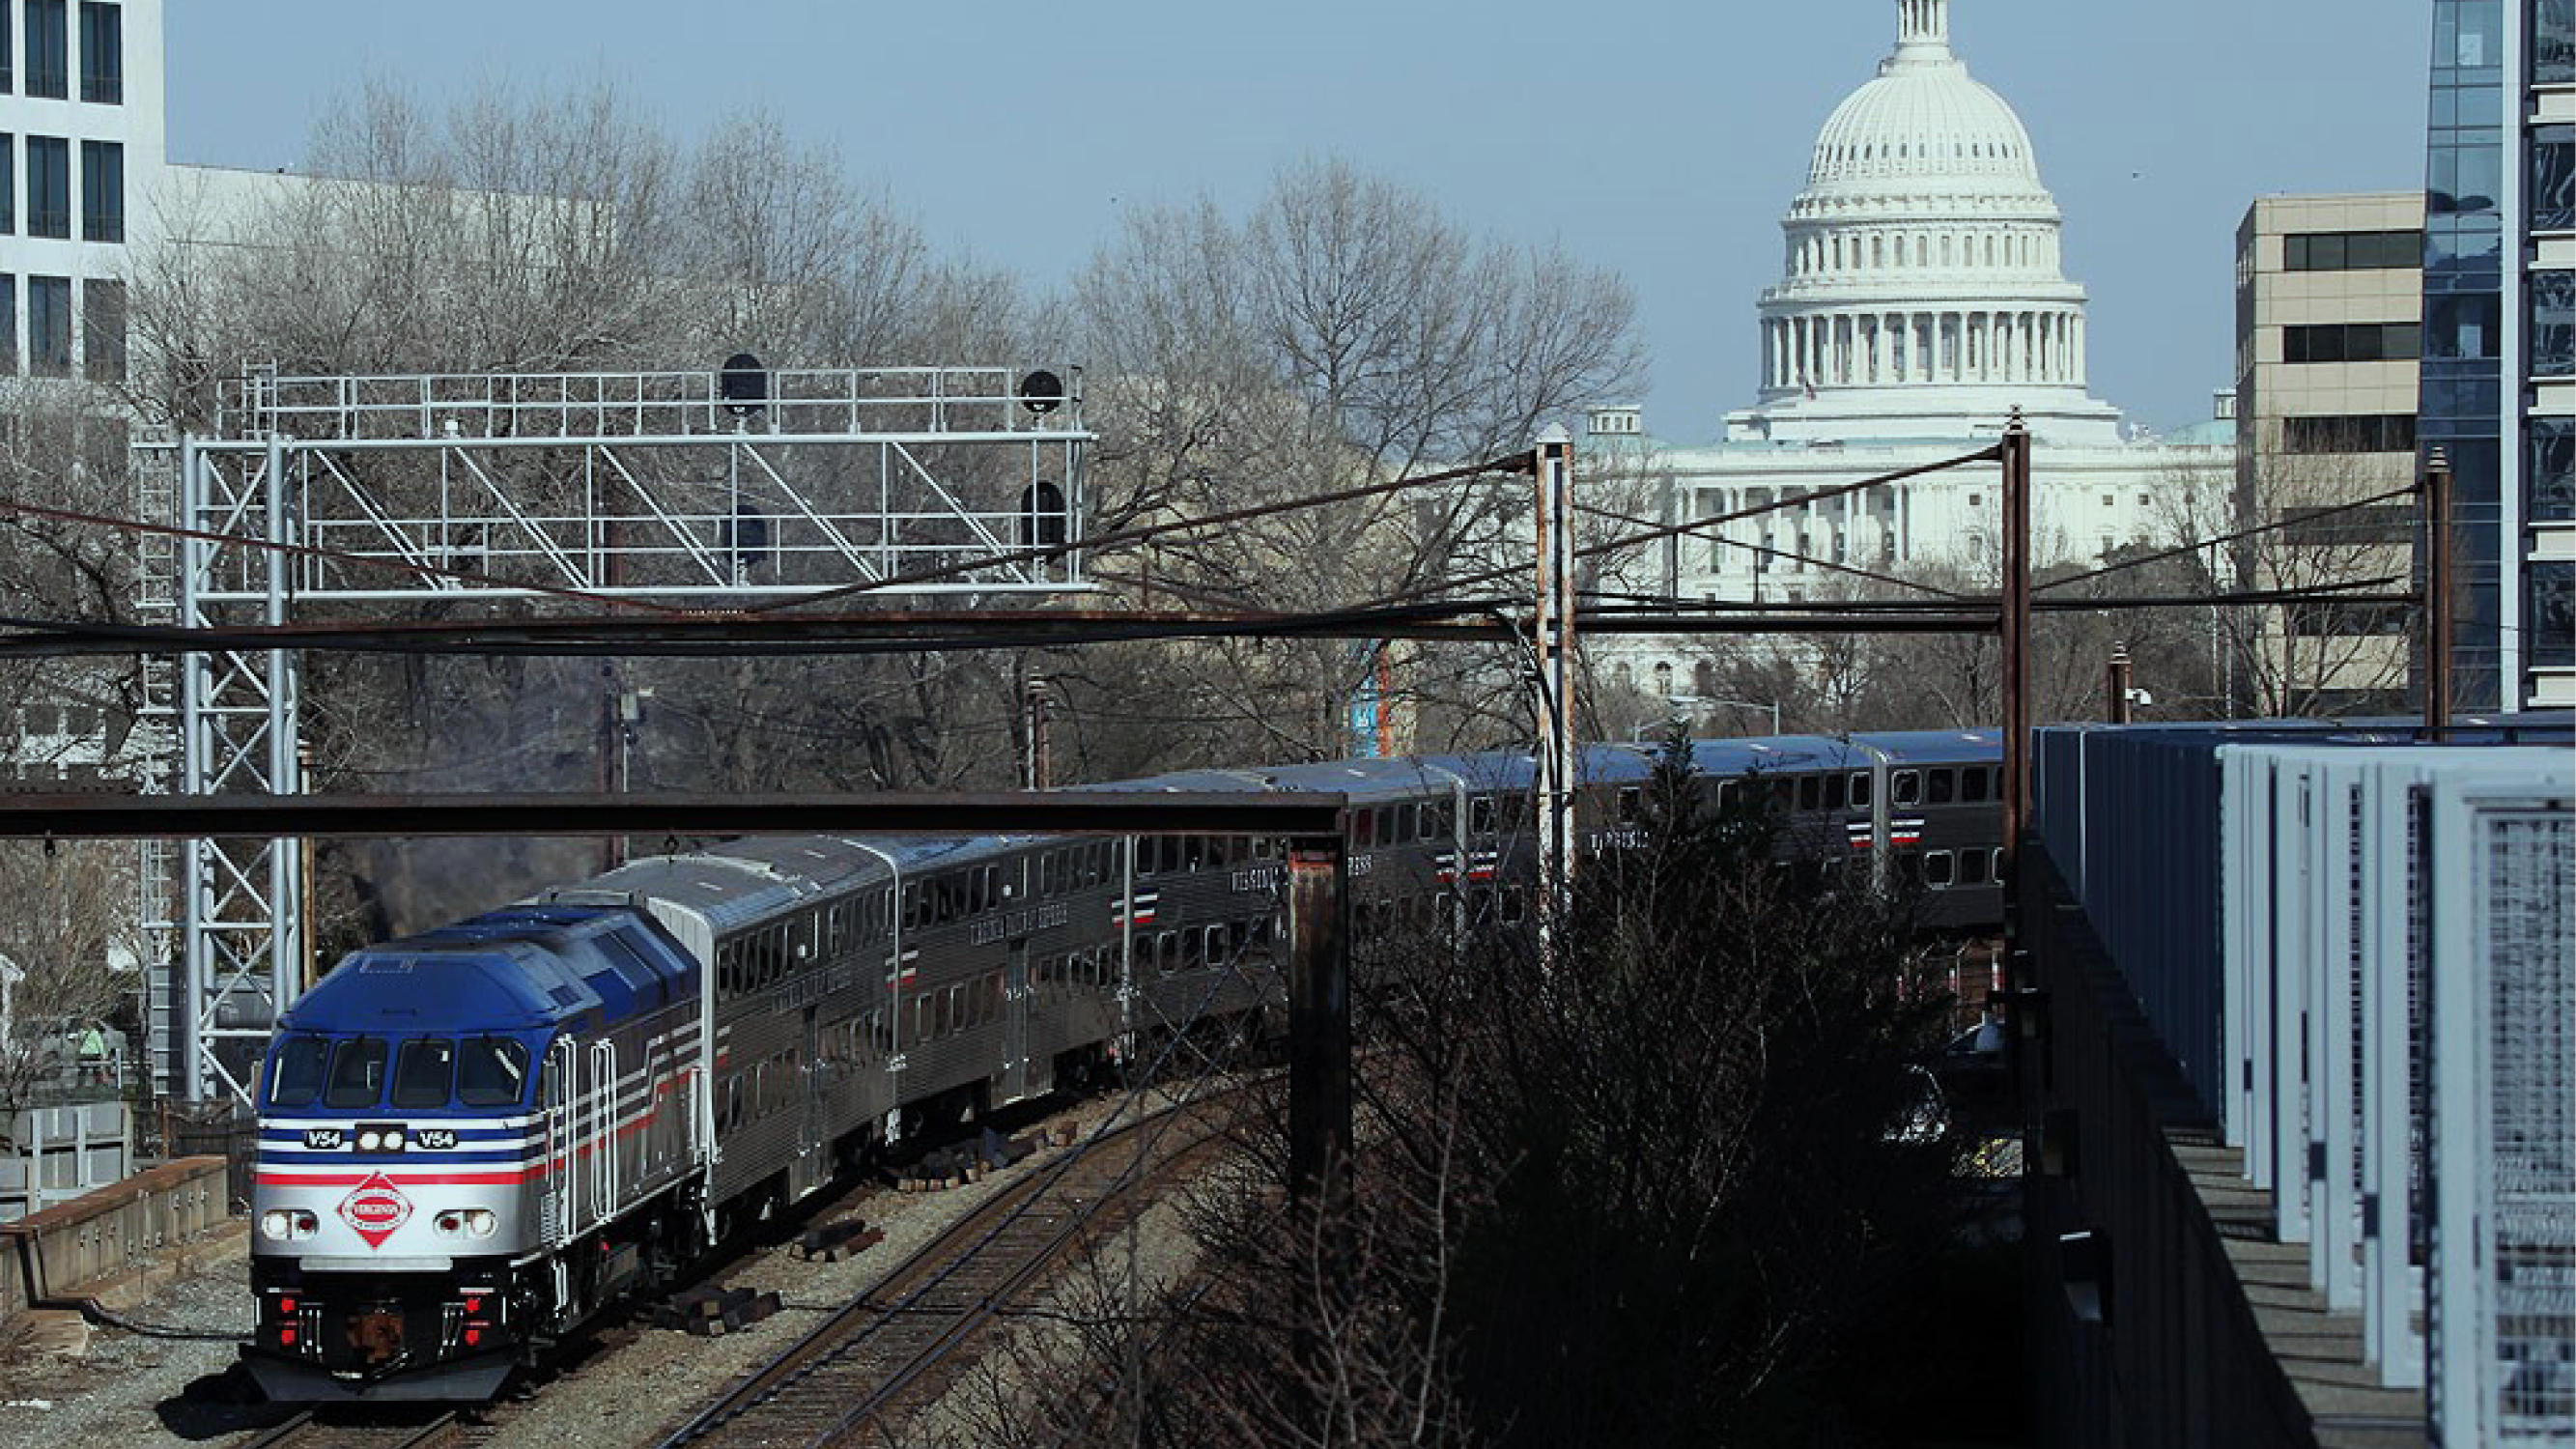 a train in front of the united states capitol